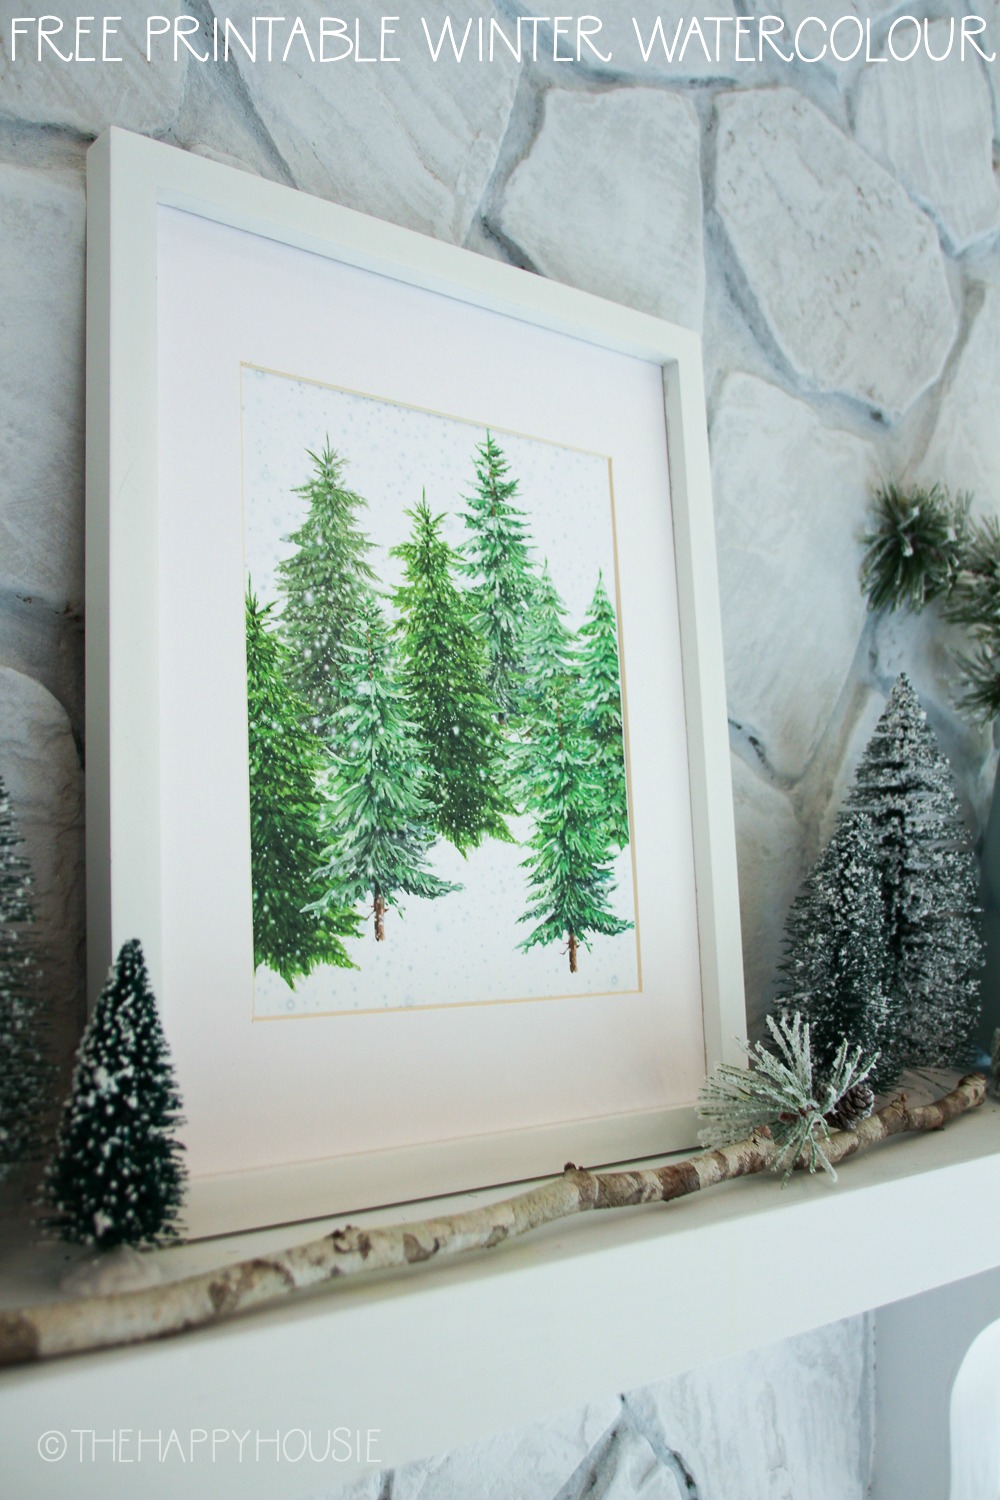 The snowy forest printable framed in white.